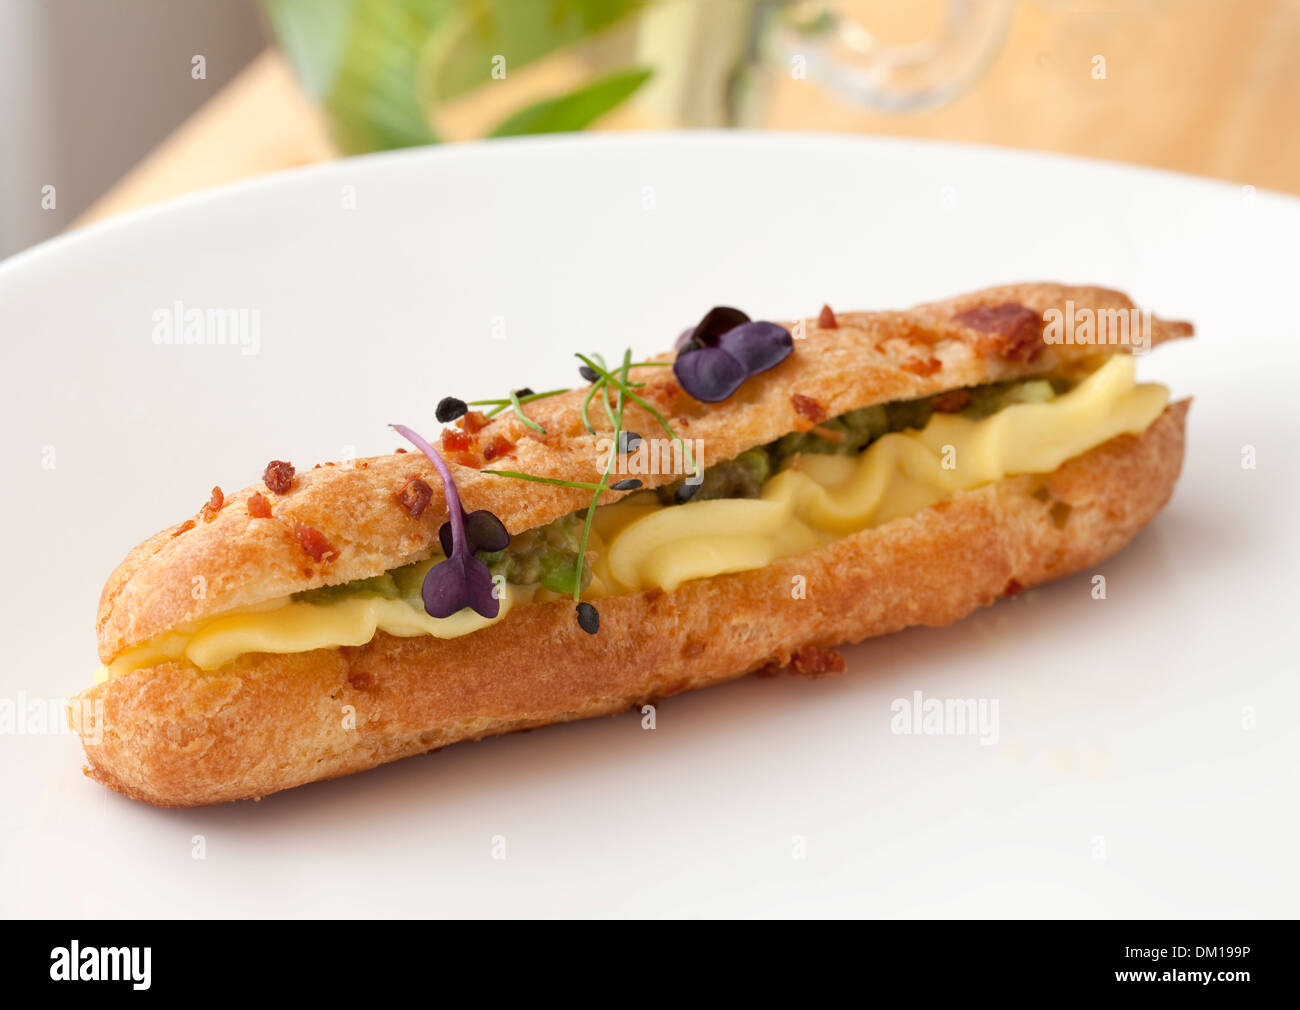 Devilled egg and avocado eclair Stock Photo